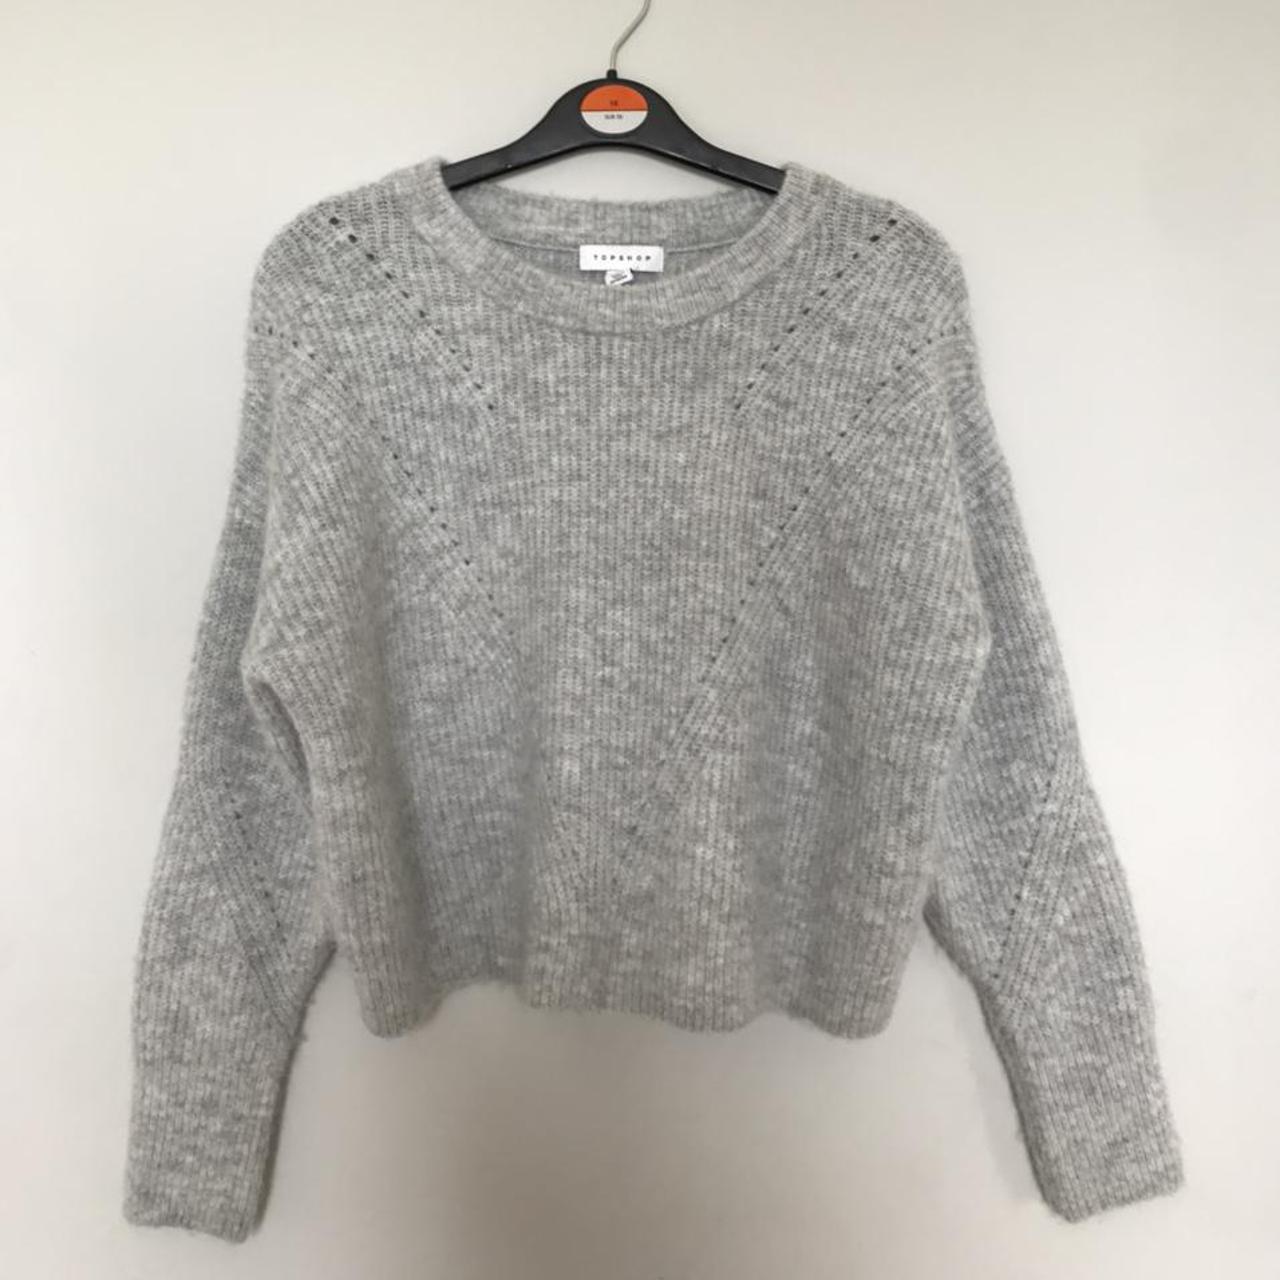 Topshop petite grey knitted jumper, so comfy and... - Depop